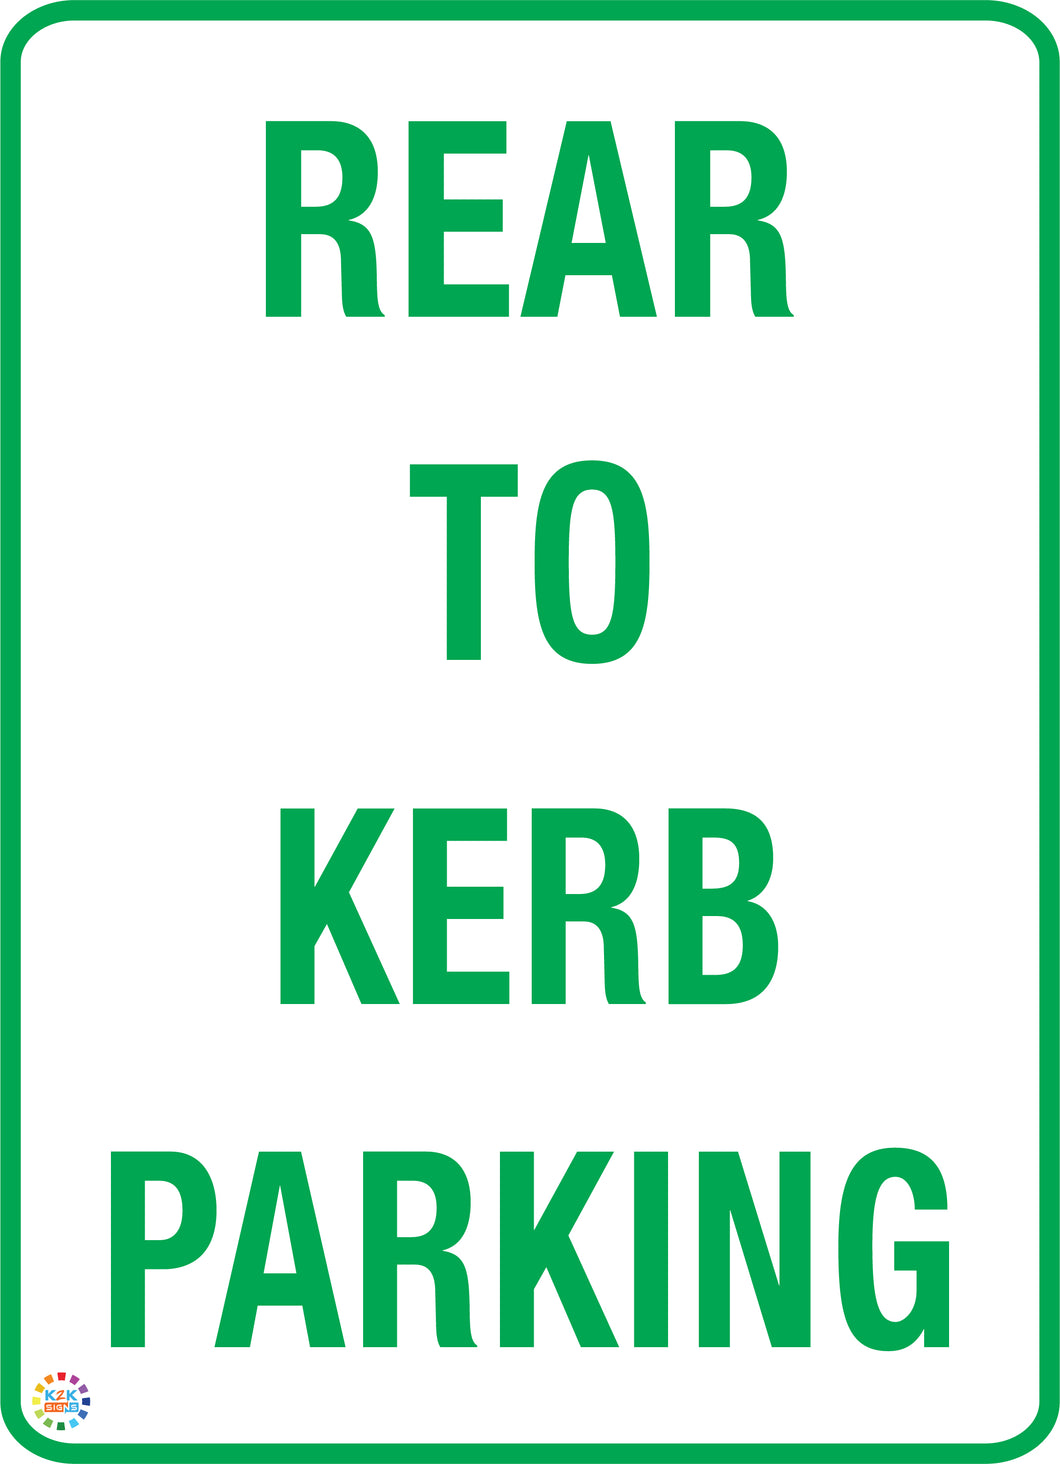 Rear To Kerb Parking Sign